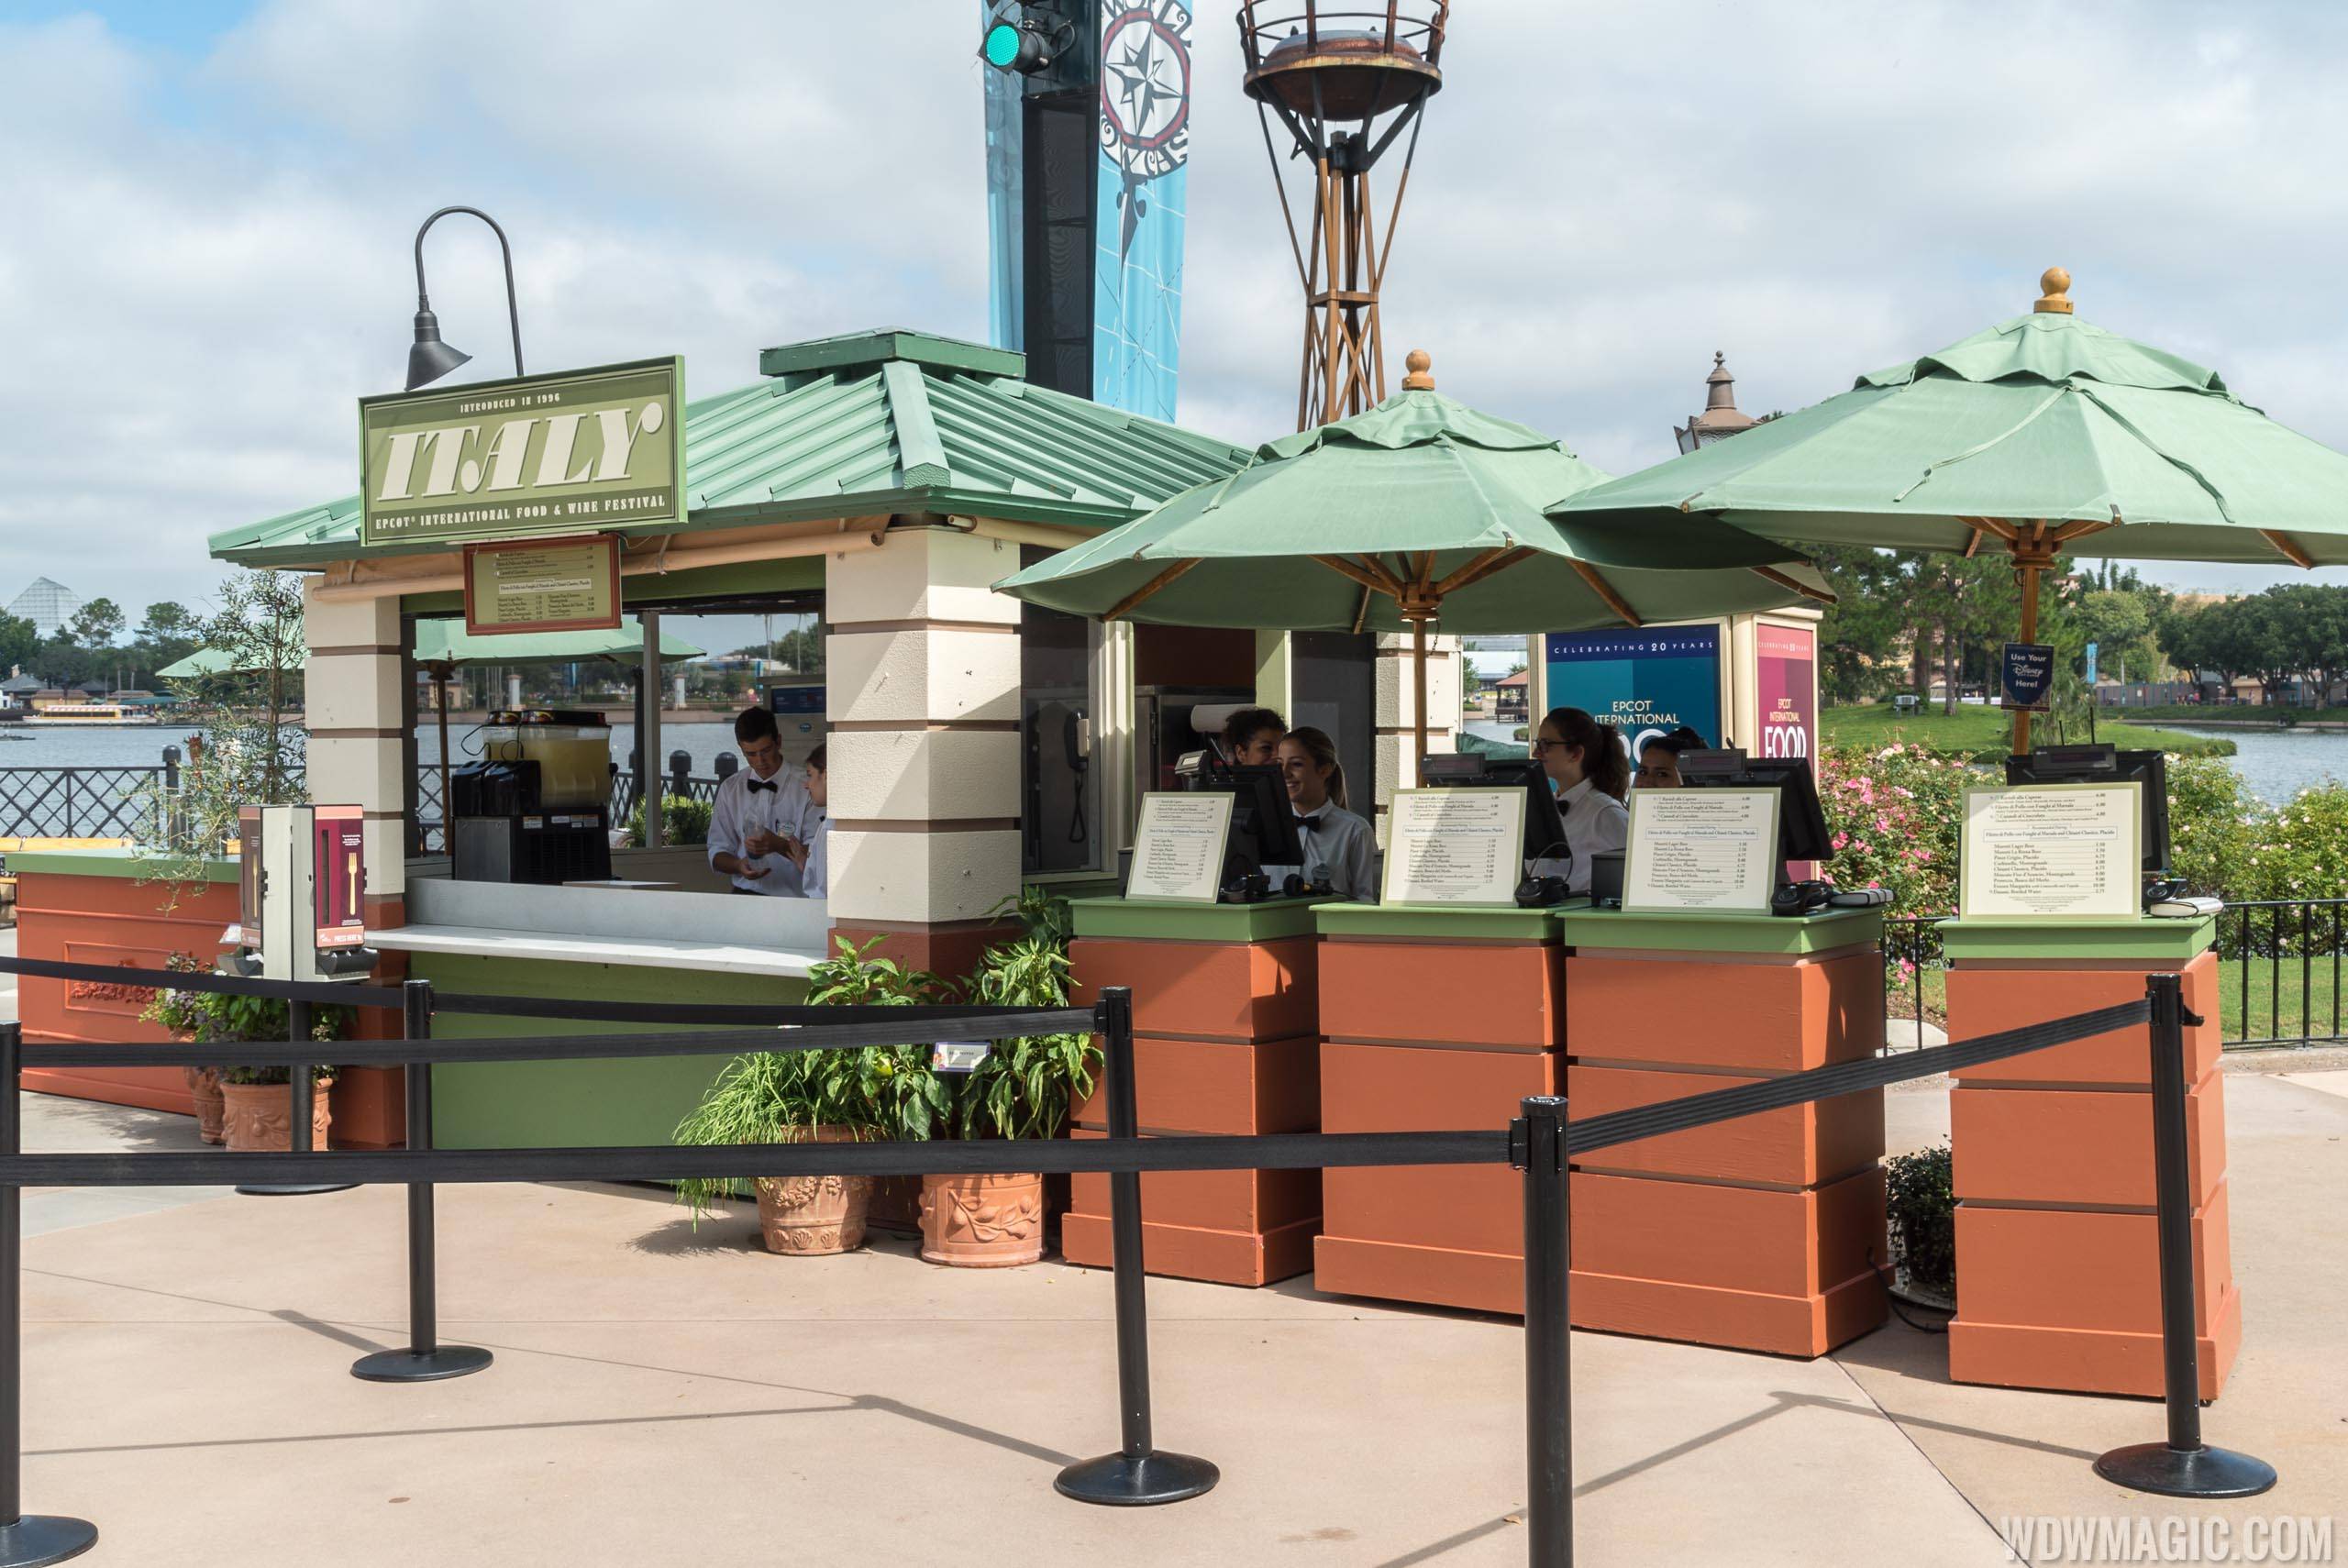 2015 Epcot Food and Wine Festival Marketplace kiosk - Italy